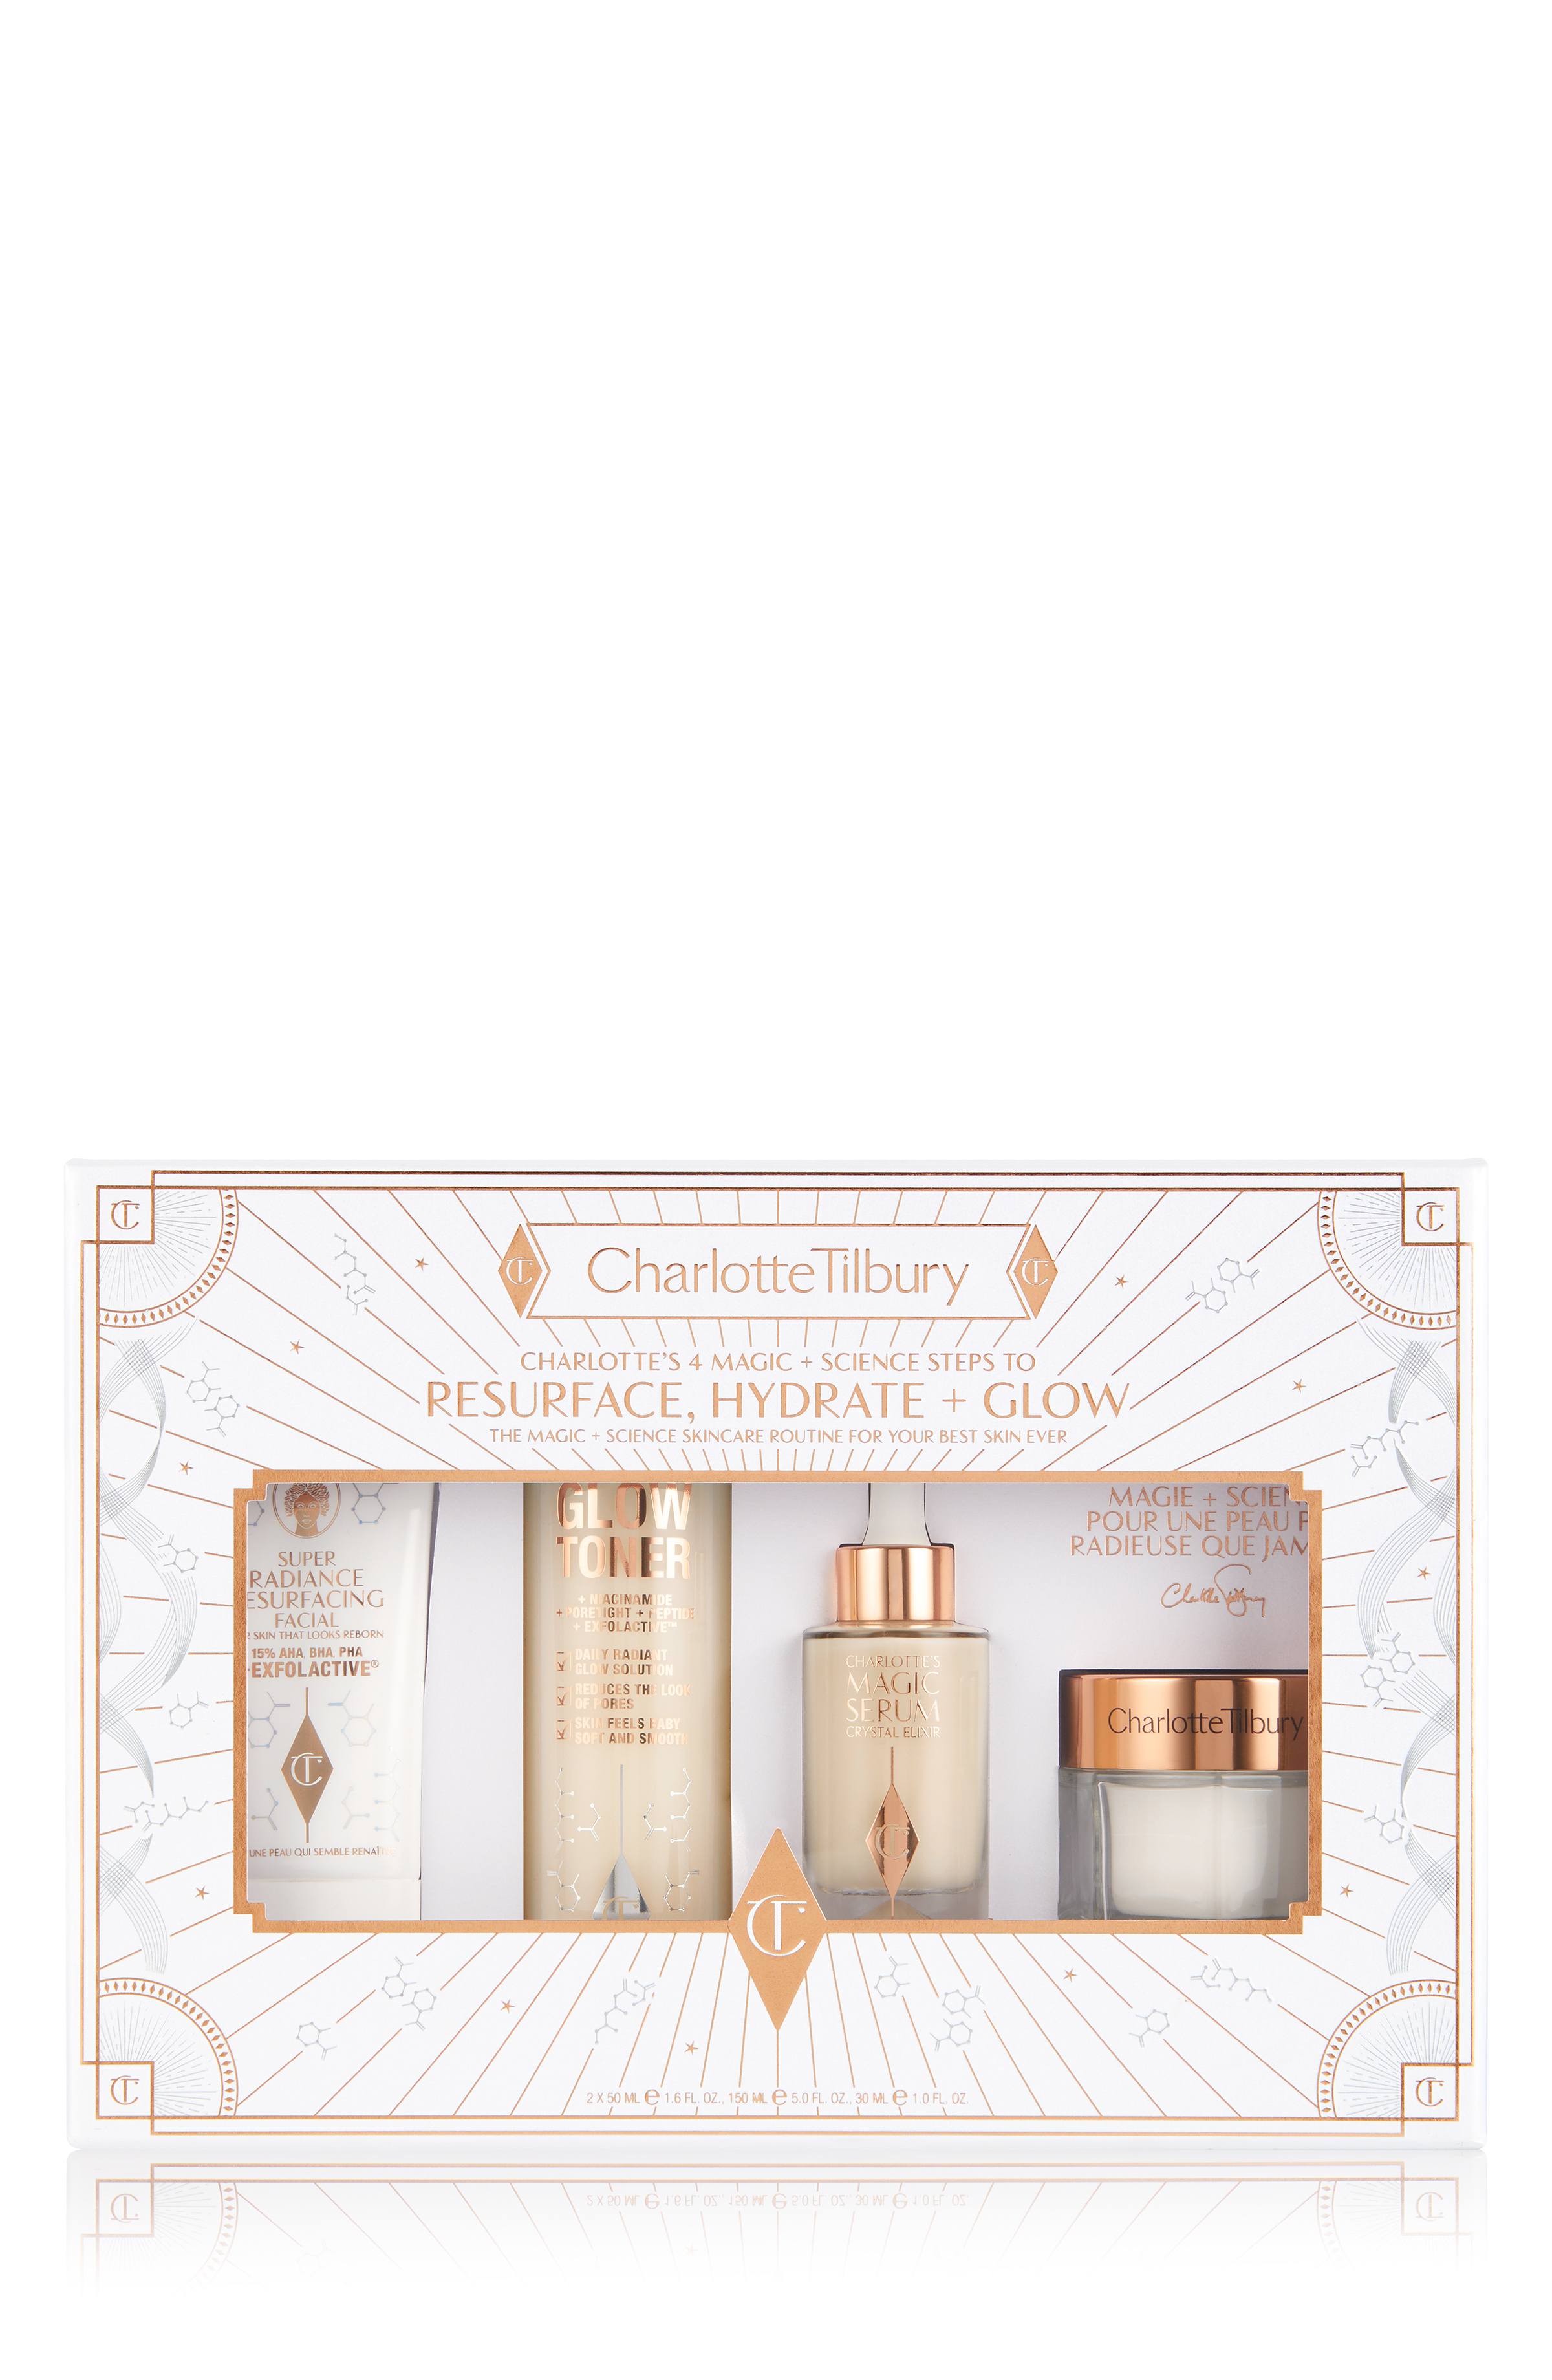 Science　Charlotte　Tilbury　Resurface,　Charlotte's　Hydrate　Space　Magic　Steps　Glow　to　NK